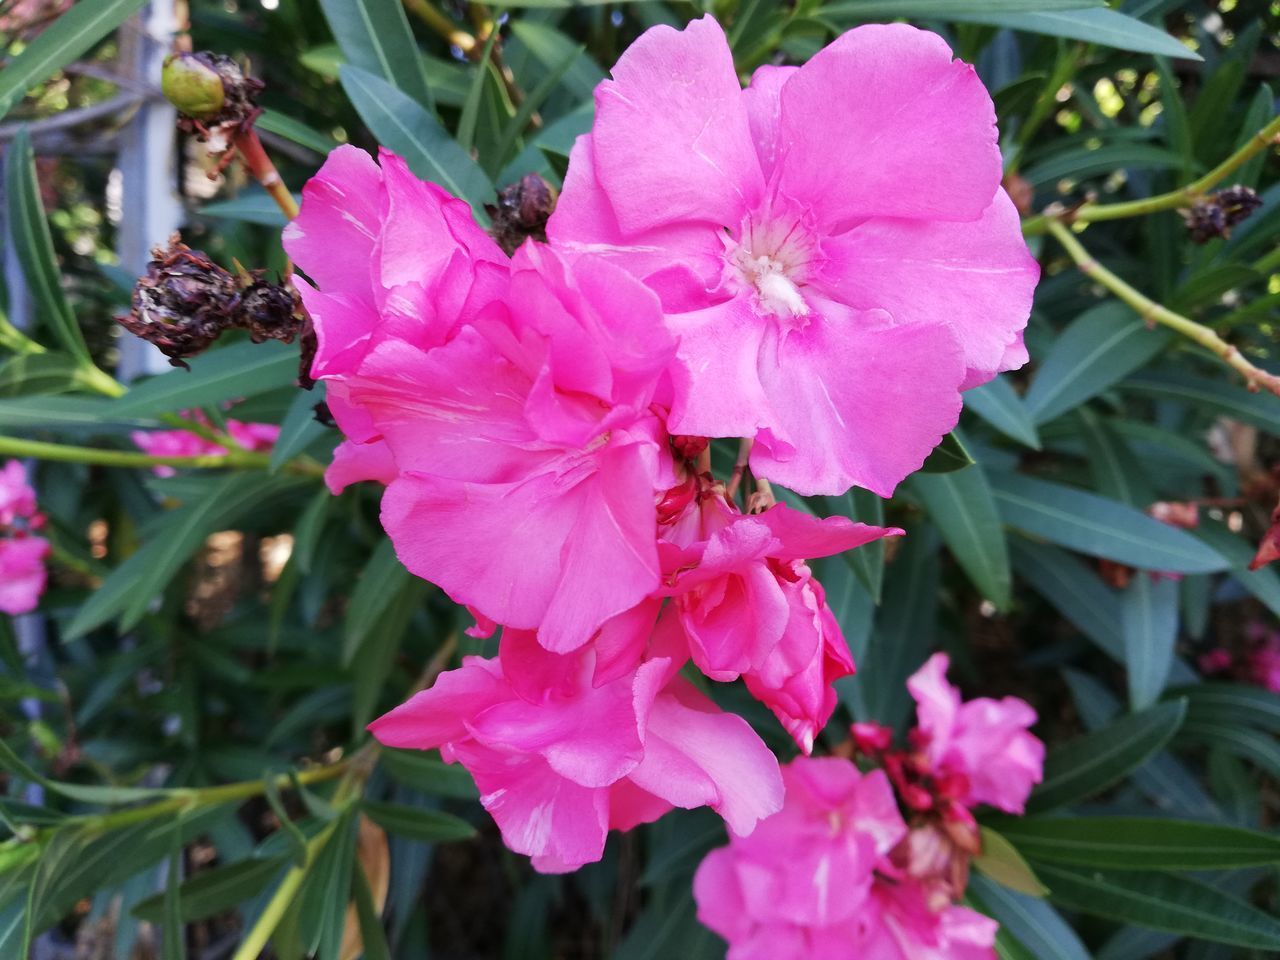 CLOSE-UP OF PINK FLOWERING PLANT WITH RED PETALS